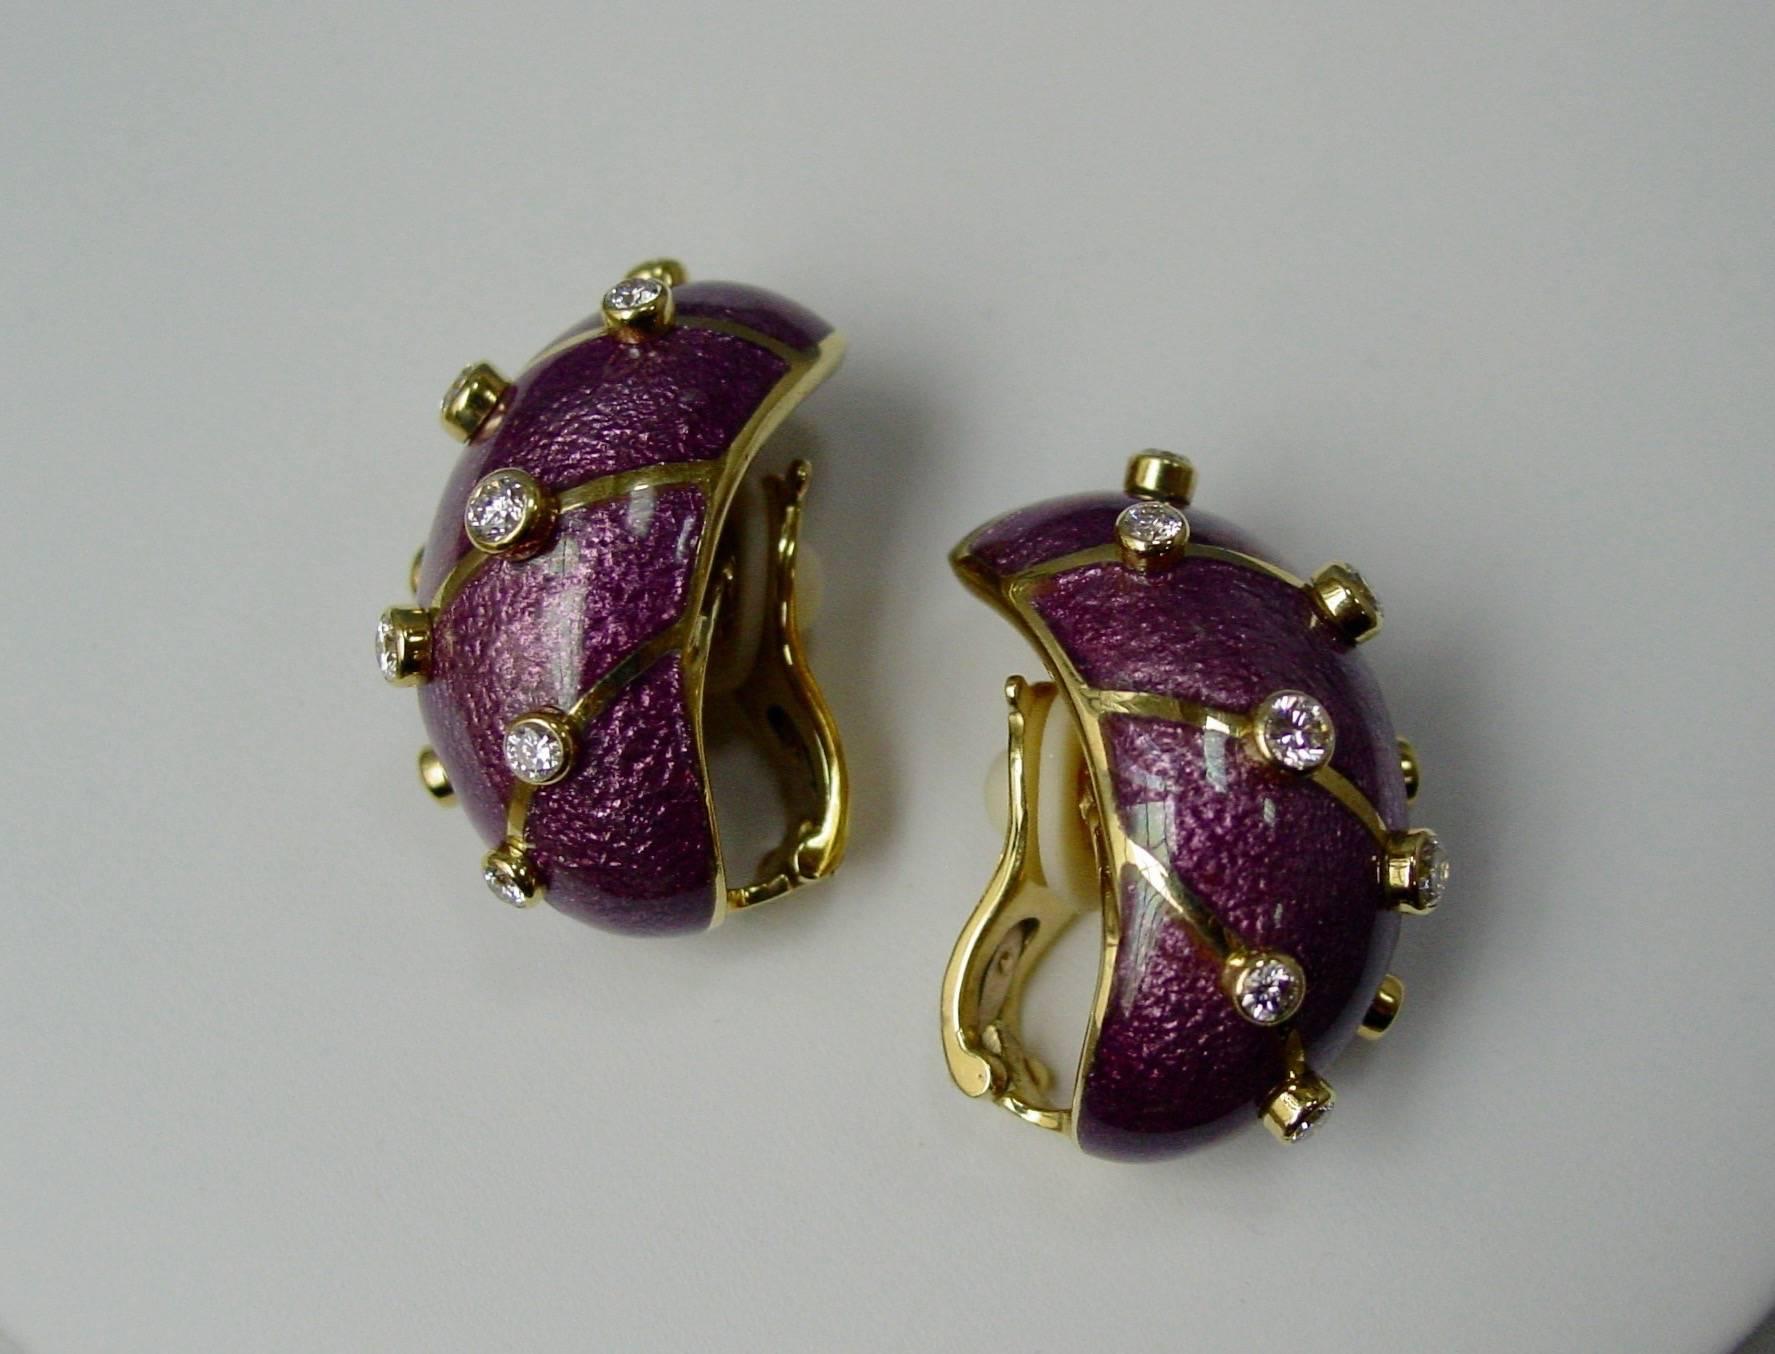 A wonderfully purple pair of paillonné enamel earclips mounted in 18 karat yellow gold and set with twenty round brilliant bezel set diamonds weighing approximately 1.40 carats in total. Signed Tiffany & Co.,Schlumberger STD 750  France.
